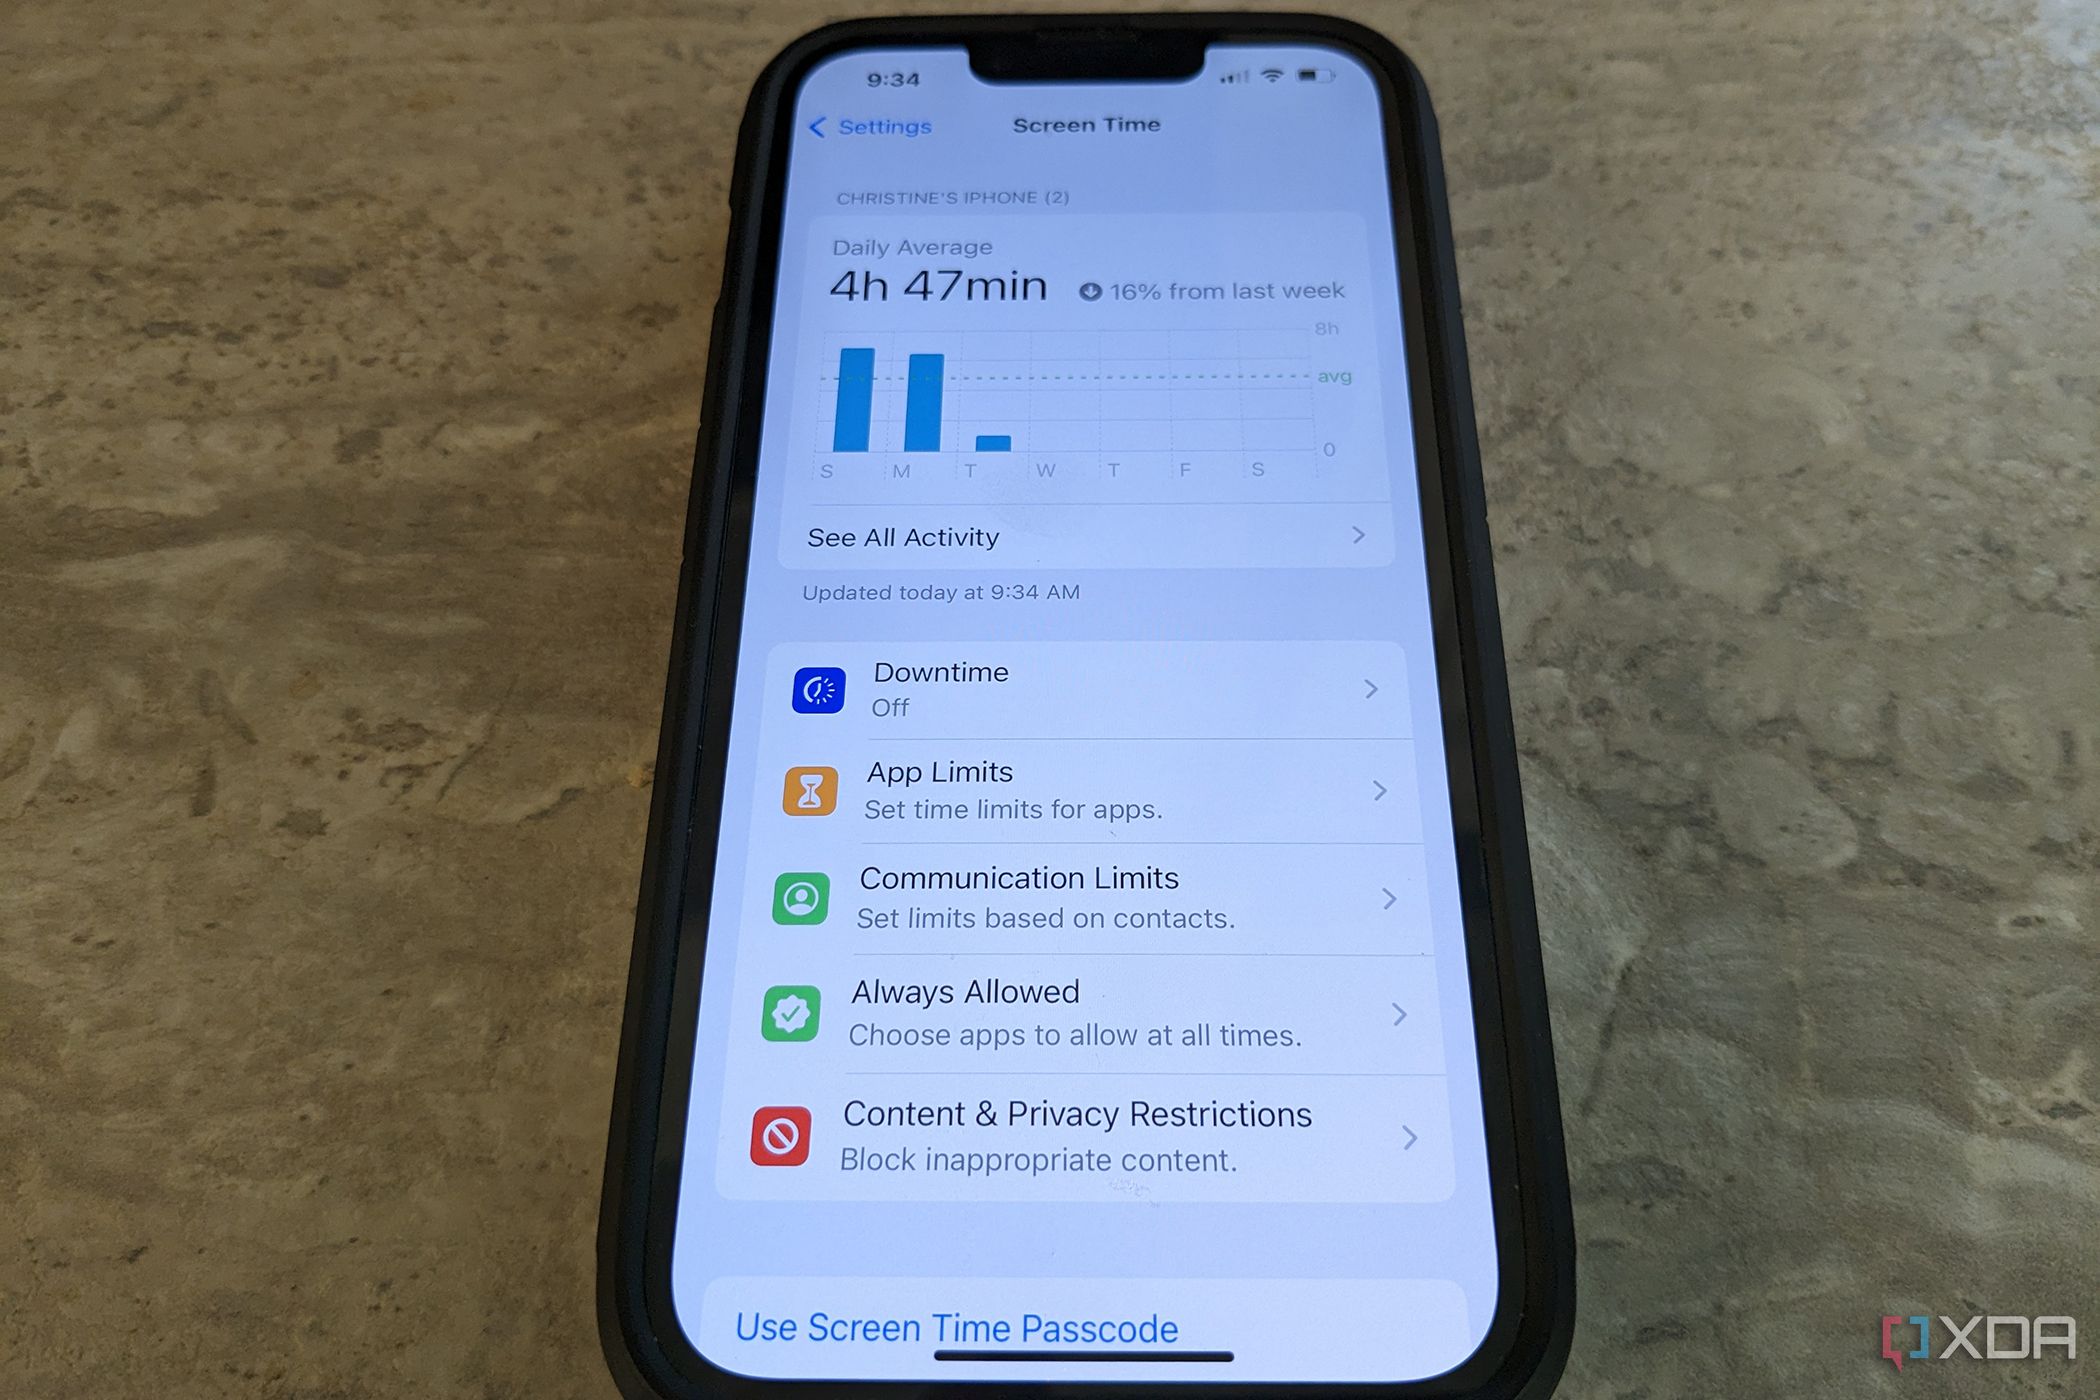 Complete guide to Screen Time and parental controls on iPhone